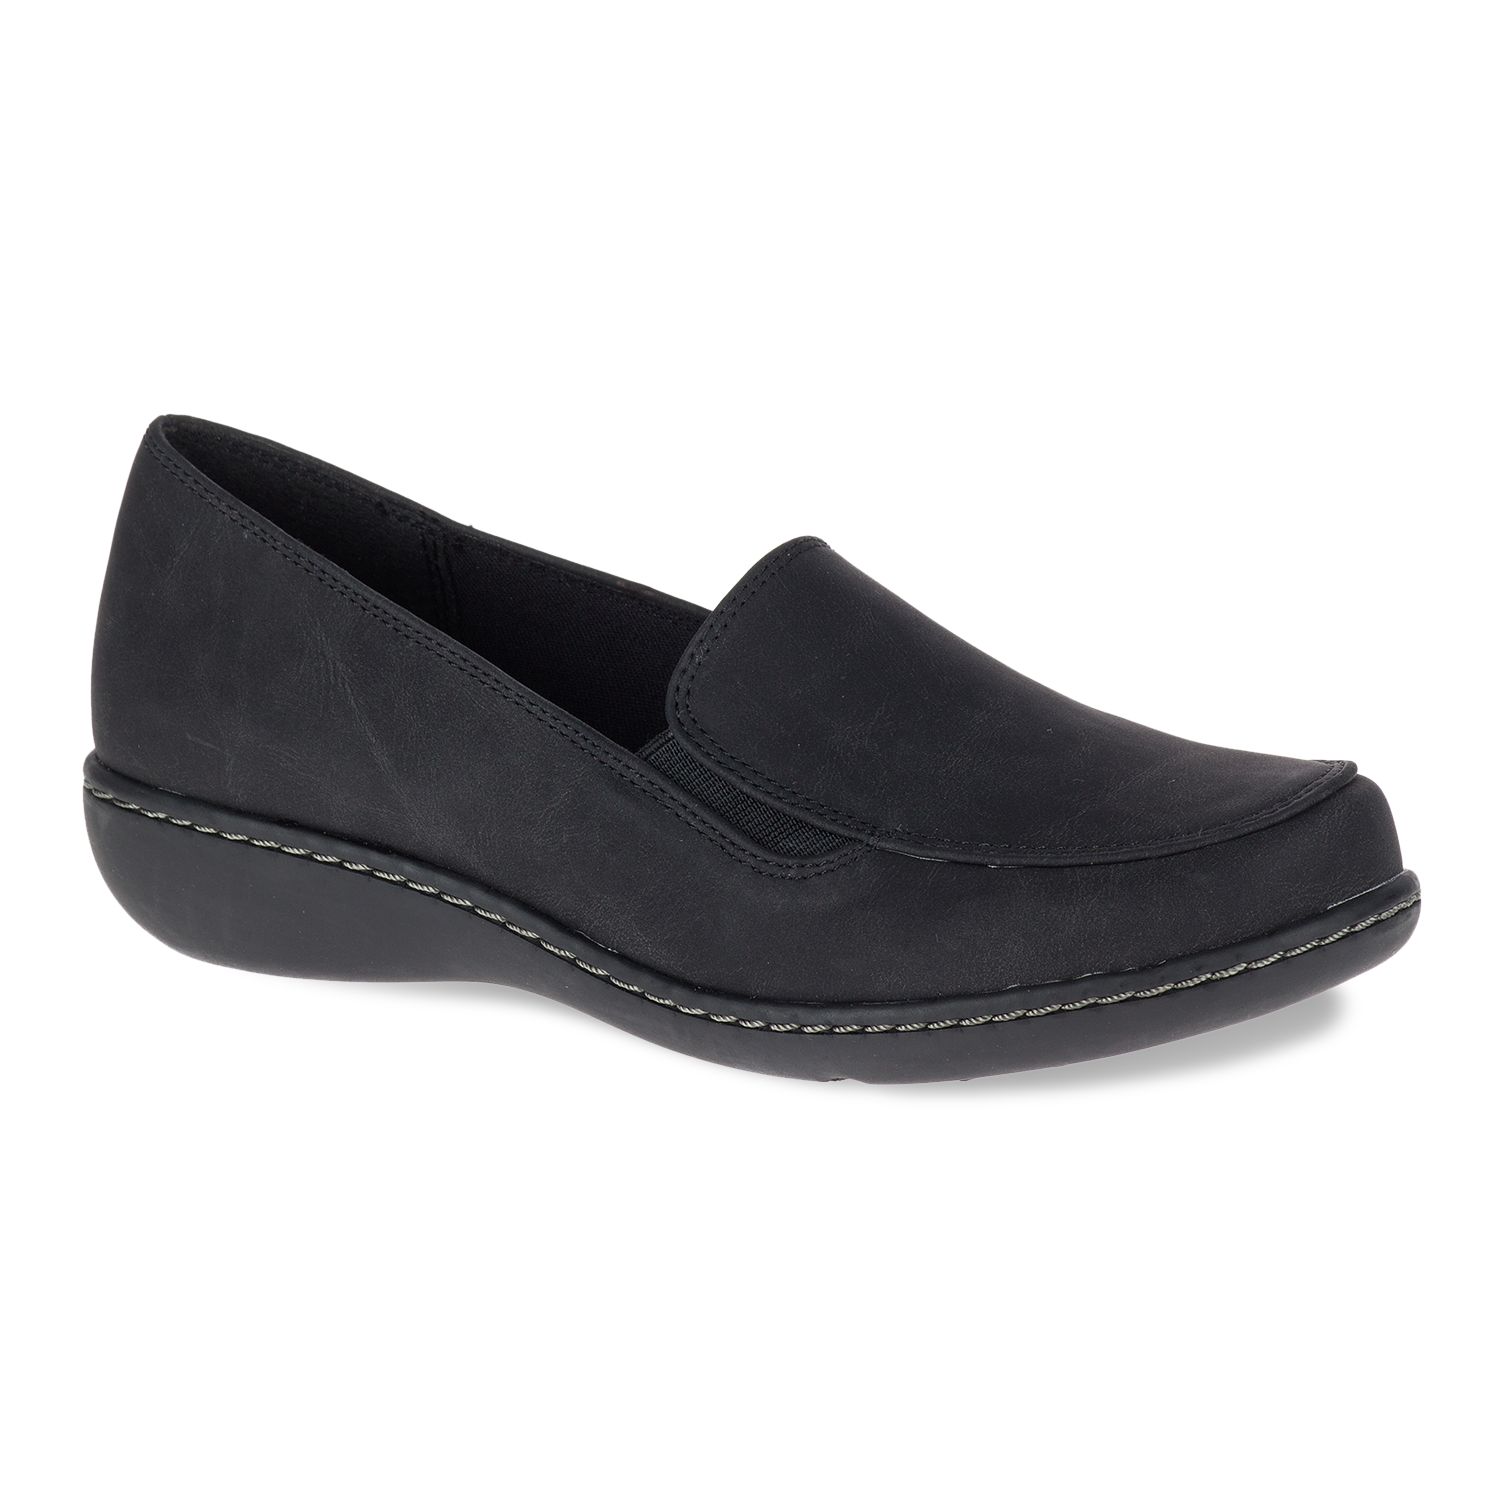 hush puppies loafers womens black